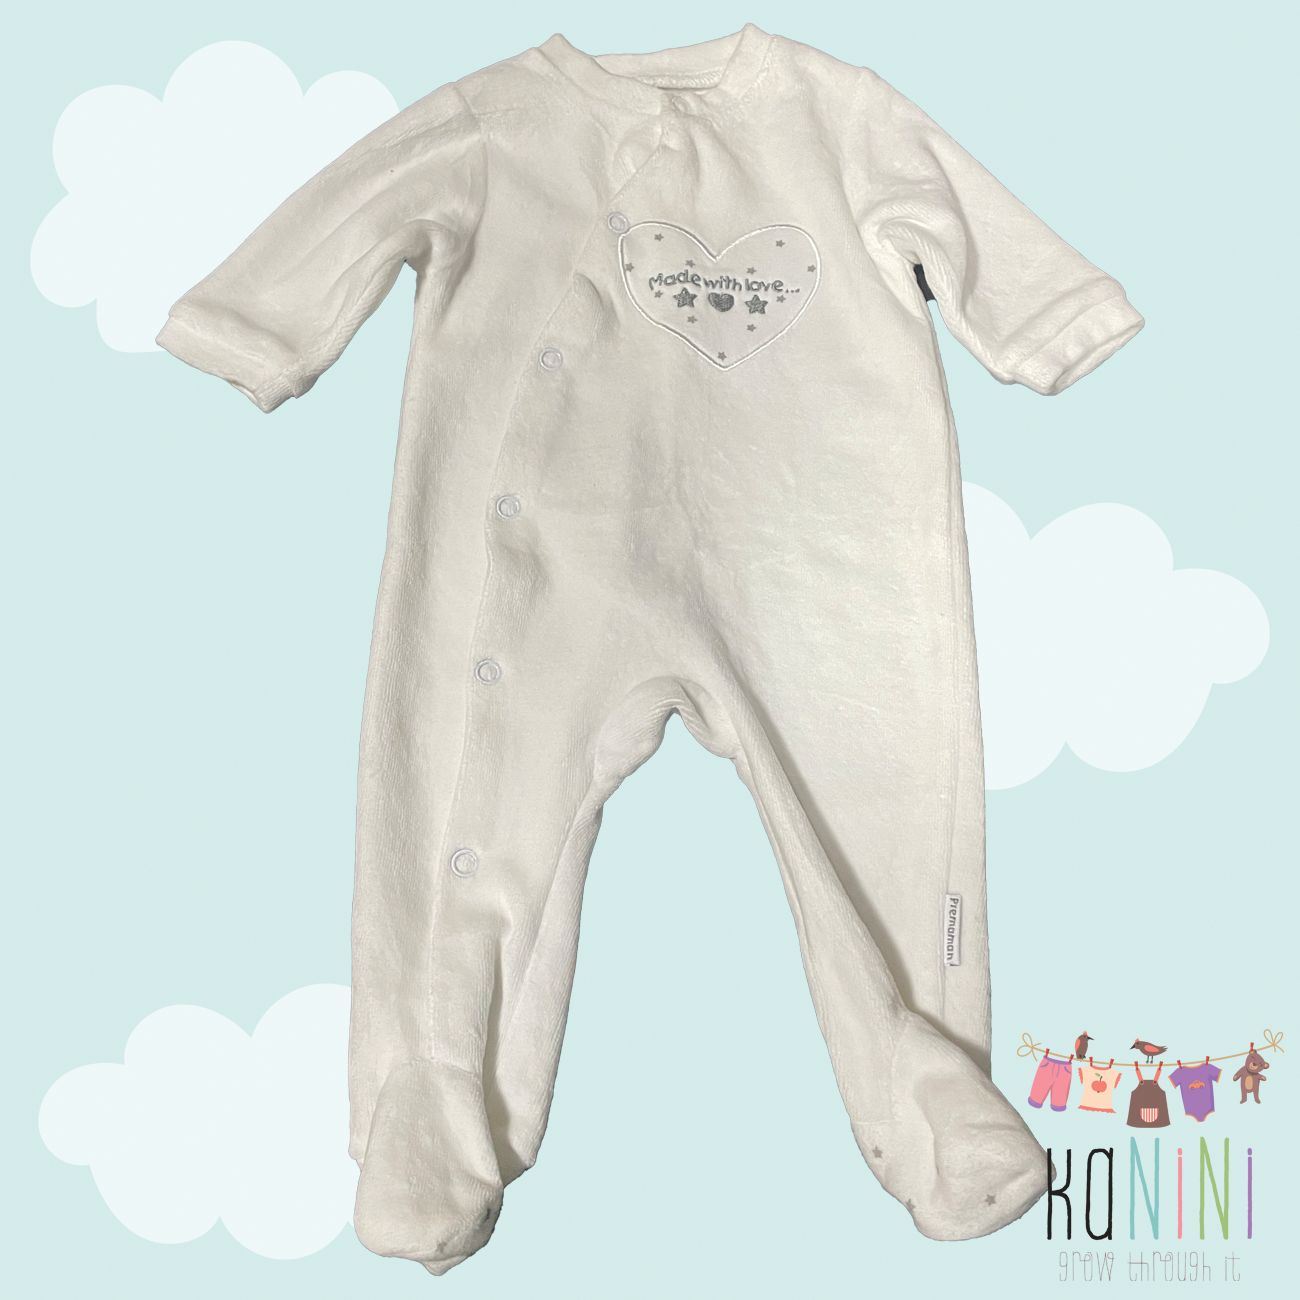 Featured image for “Mamas & Papas 0 - 3 Months Boys Babygrow”